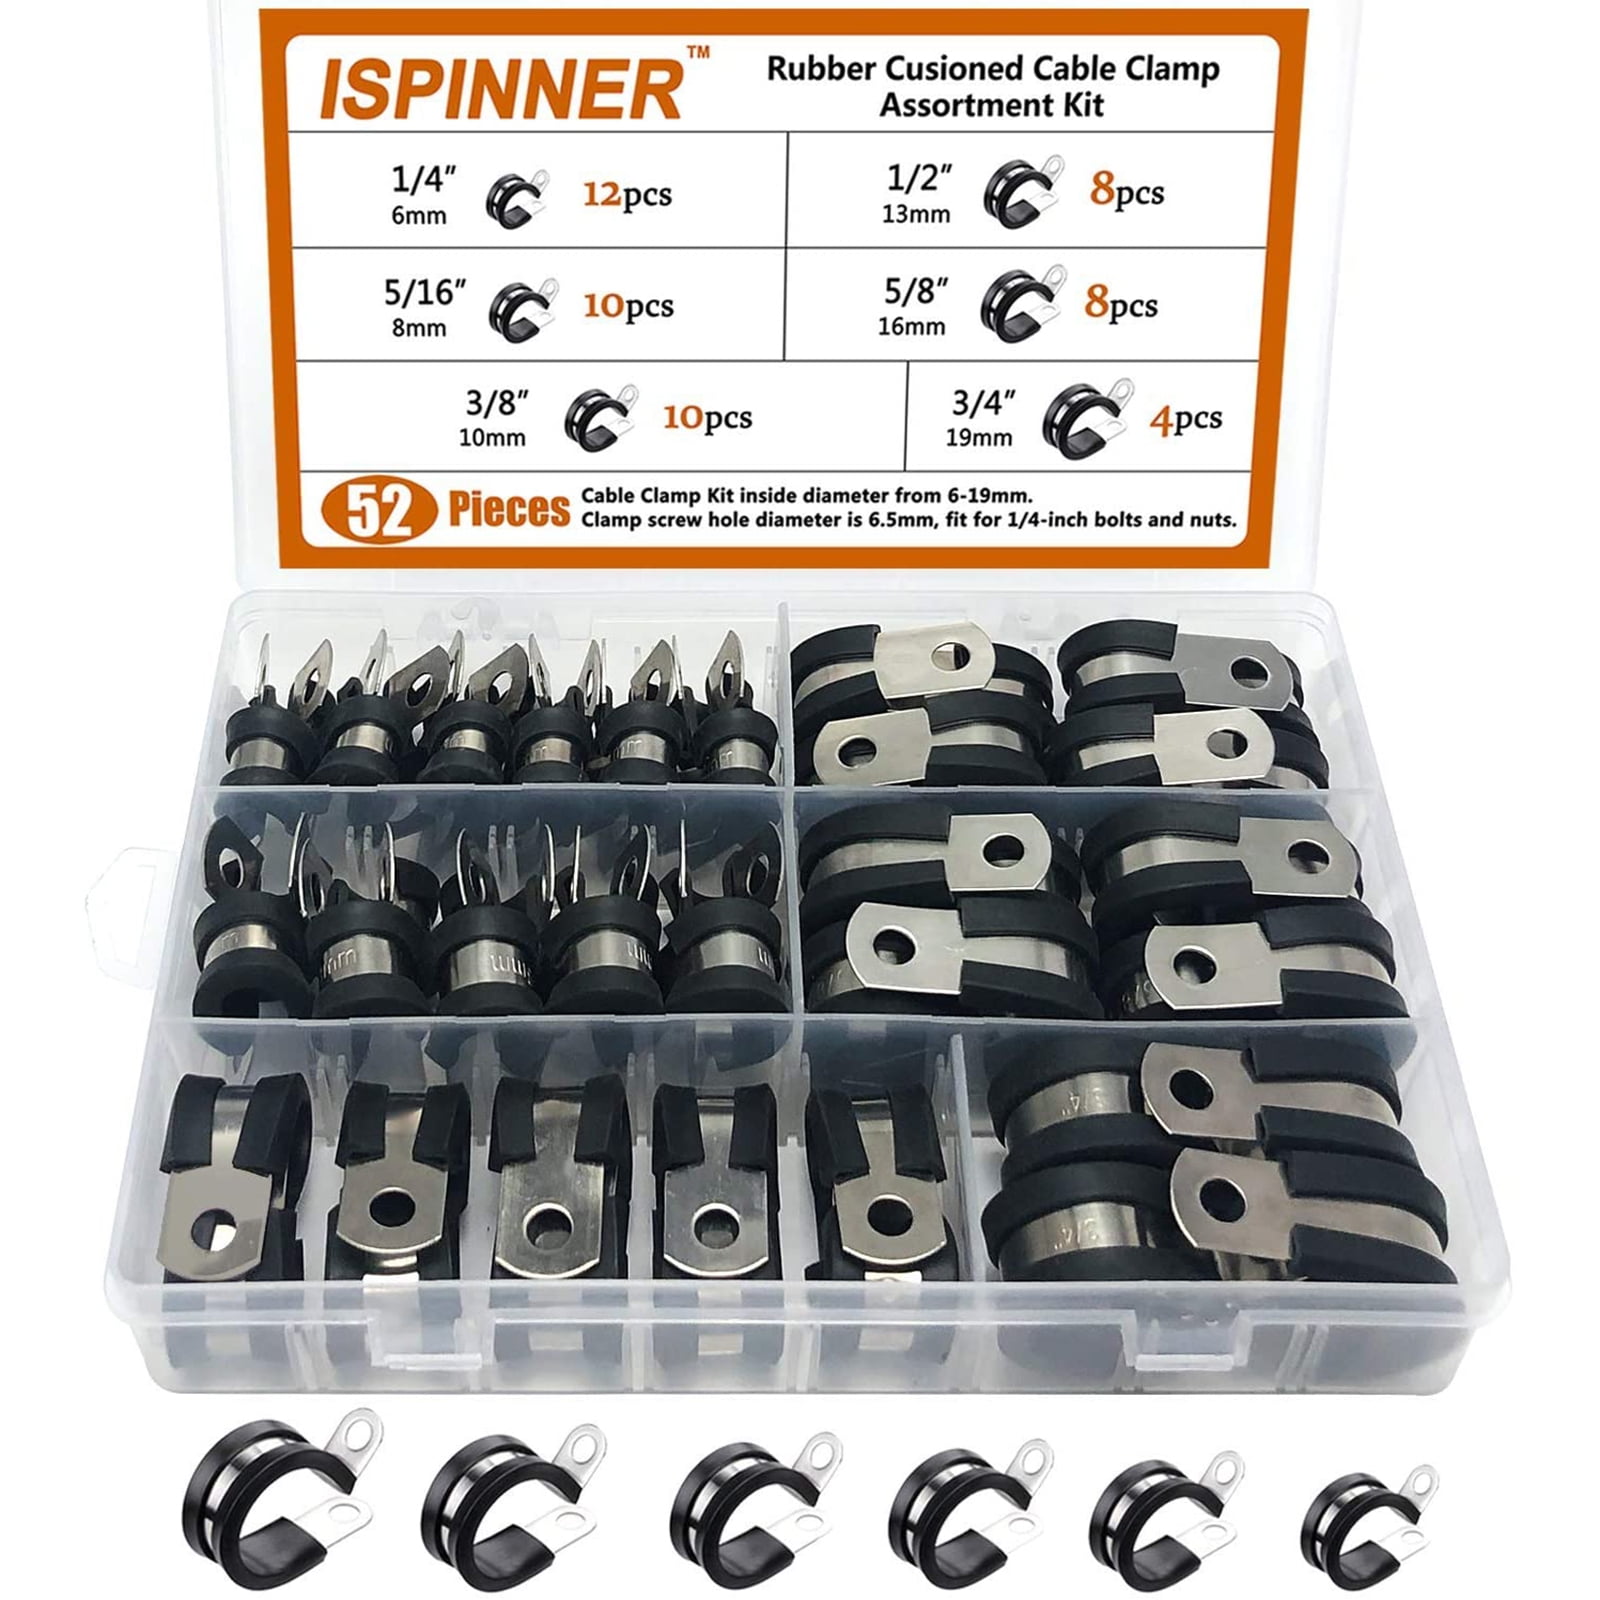 304 Stainless Steel Rubber Cushion wire clamps,Pipe Clamps in 6 Sizes 1/4 5/16 3/8 1/2 5/8 3/4 Solarson 52pcs Cable Clamps Assortment Kit